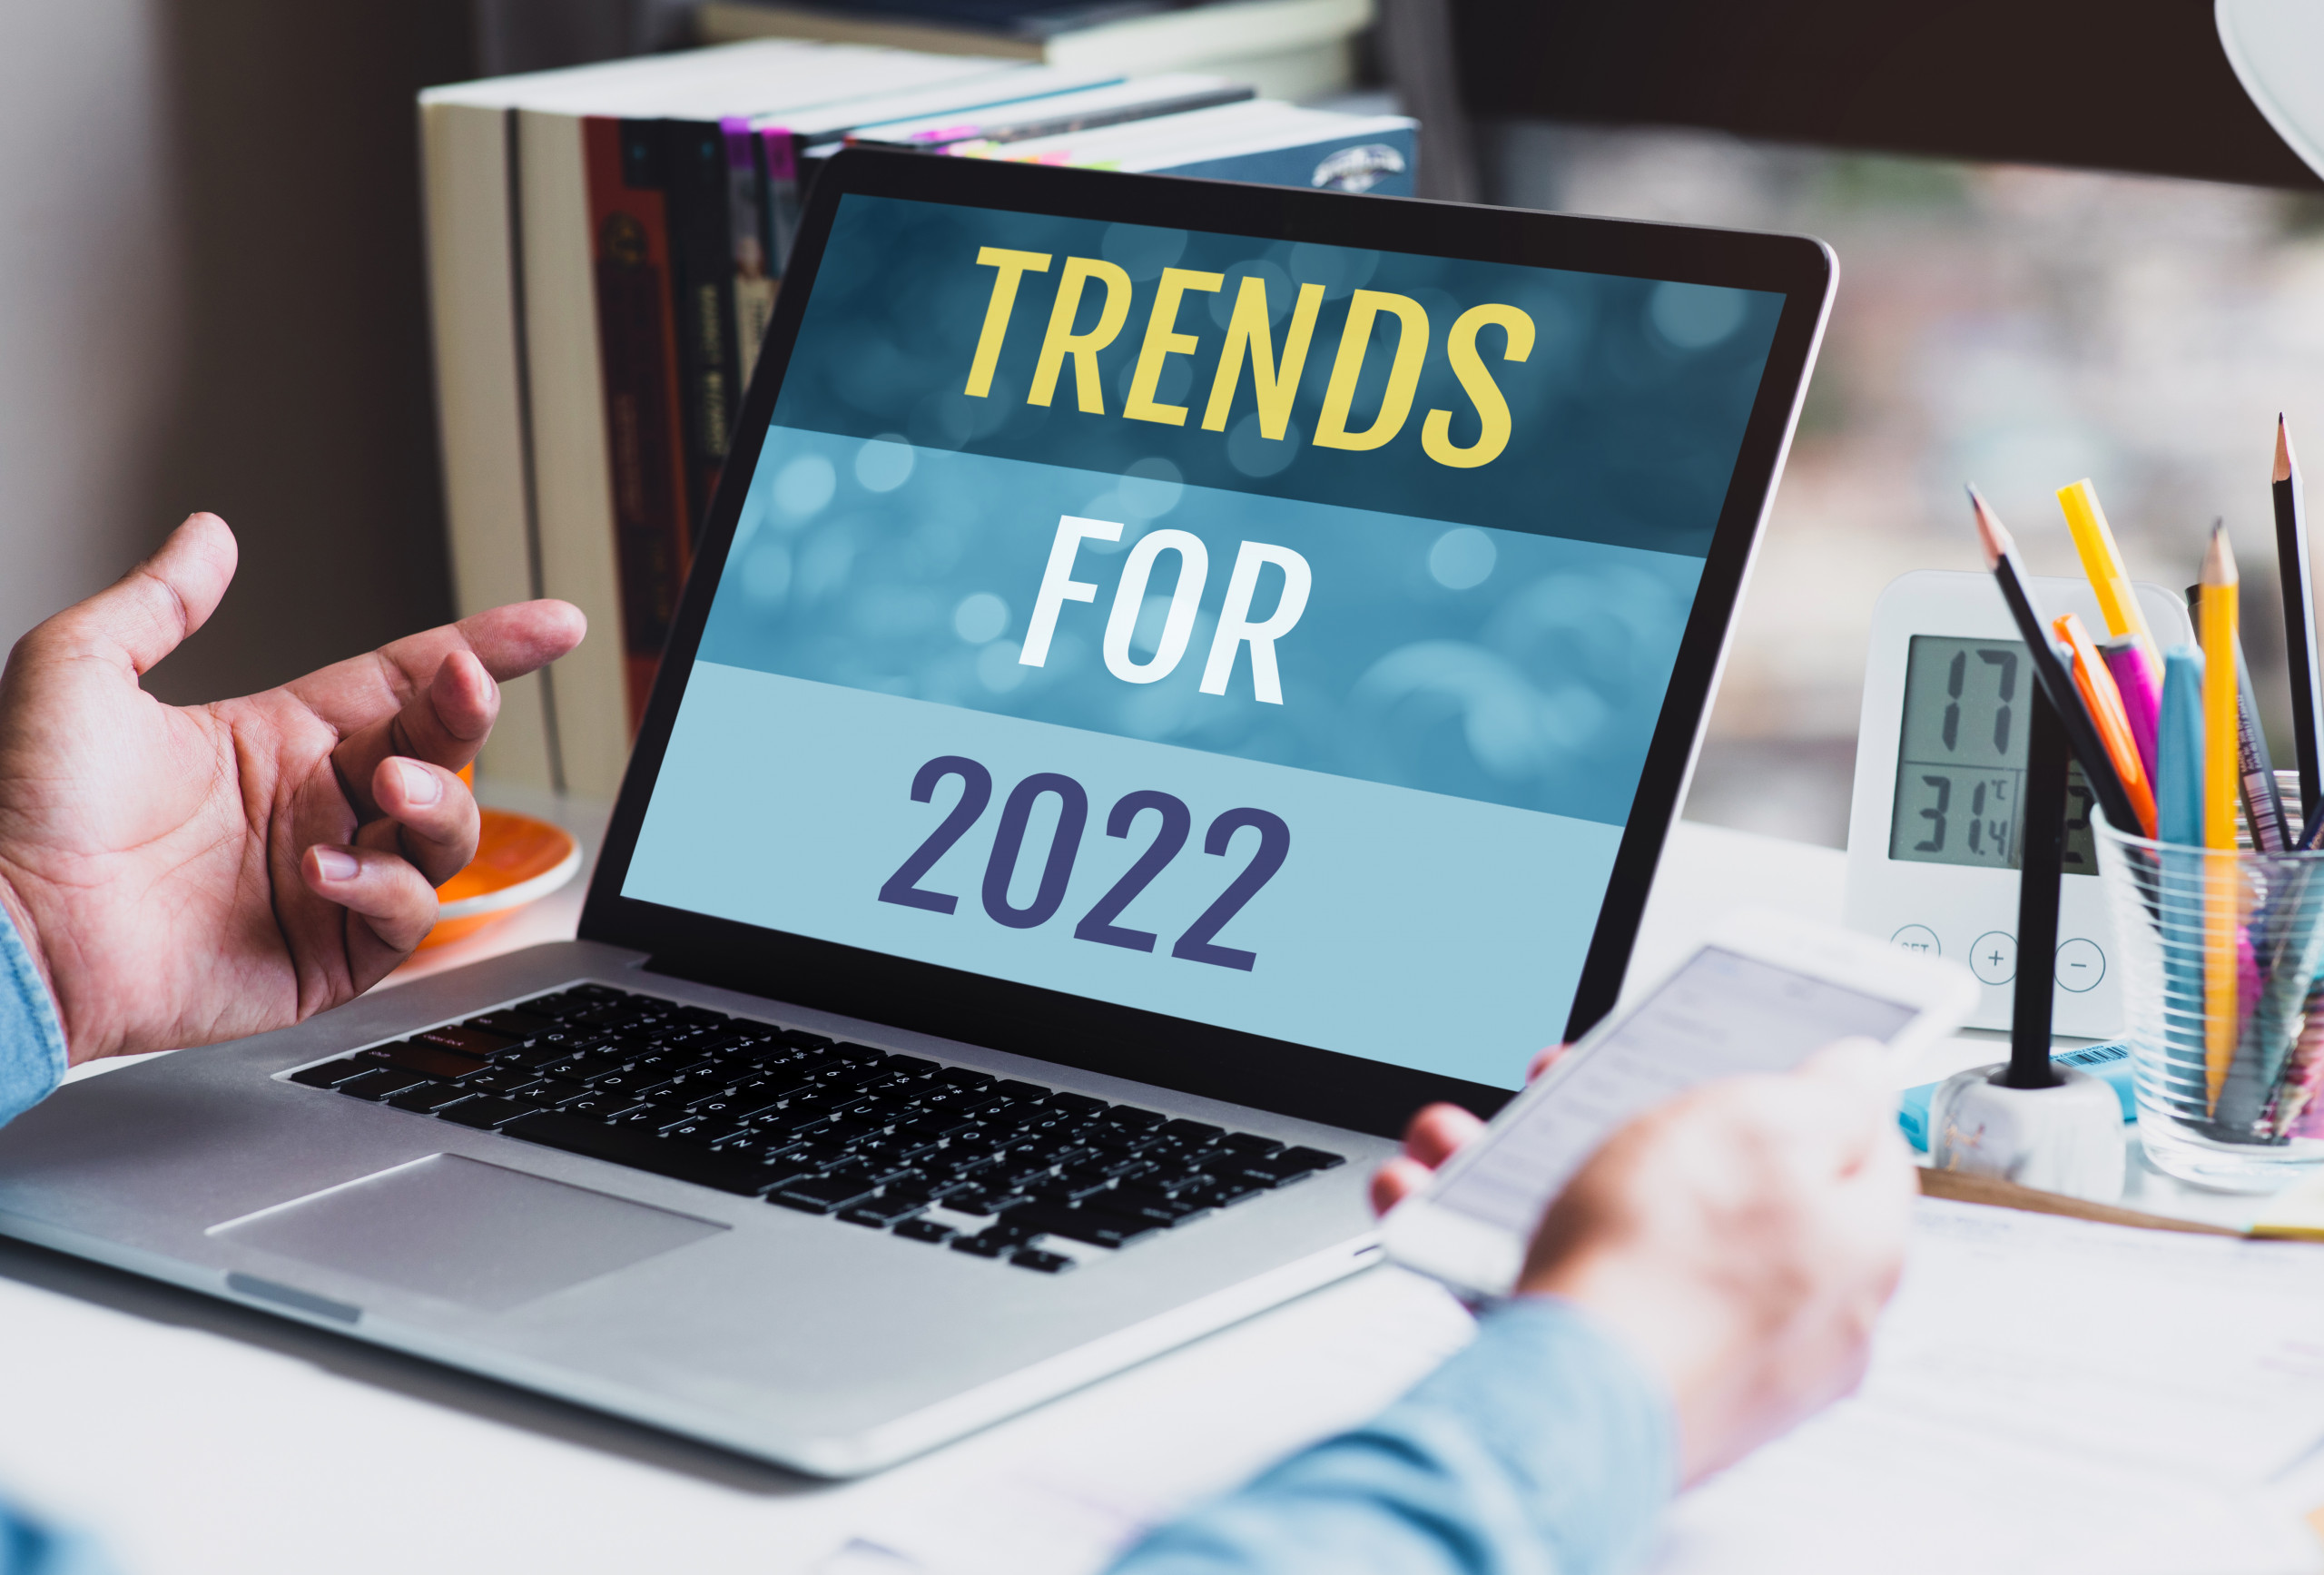 Trends for 2022 or business creativity with text and young person using conputer.